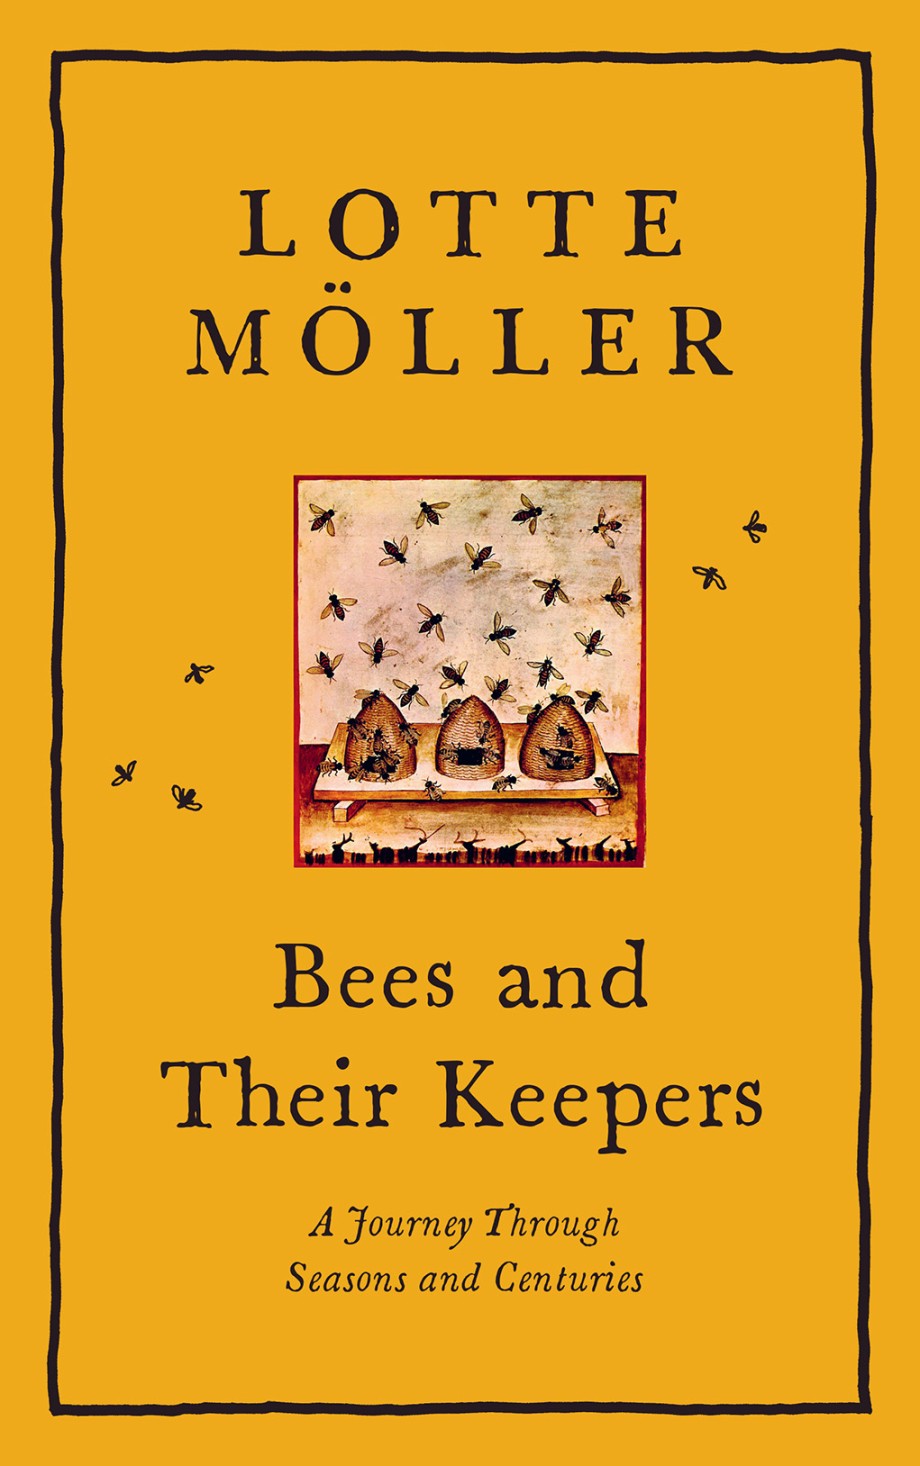 Bees and Their Keepers A Journey Through Seasons and Centuries